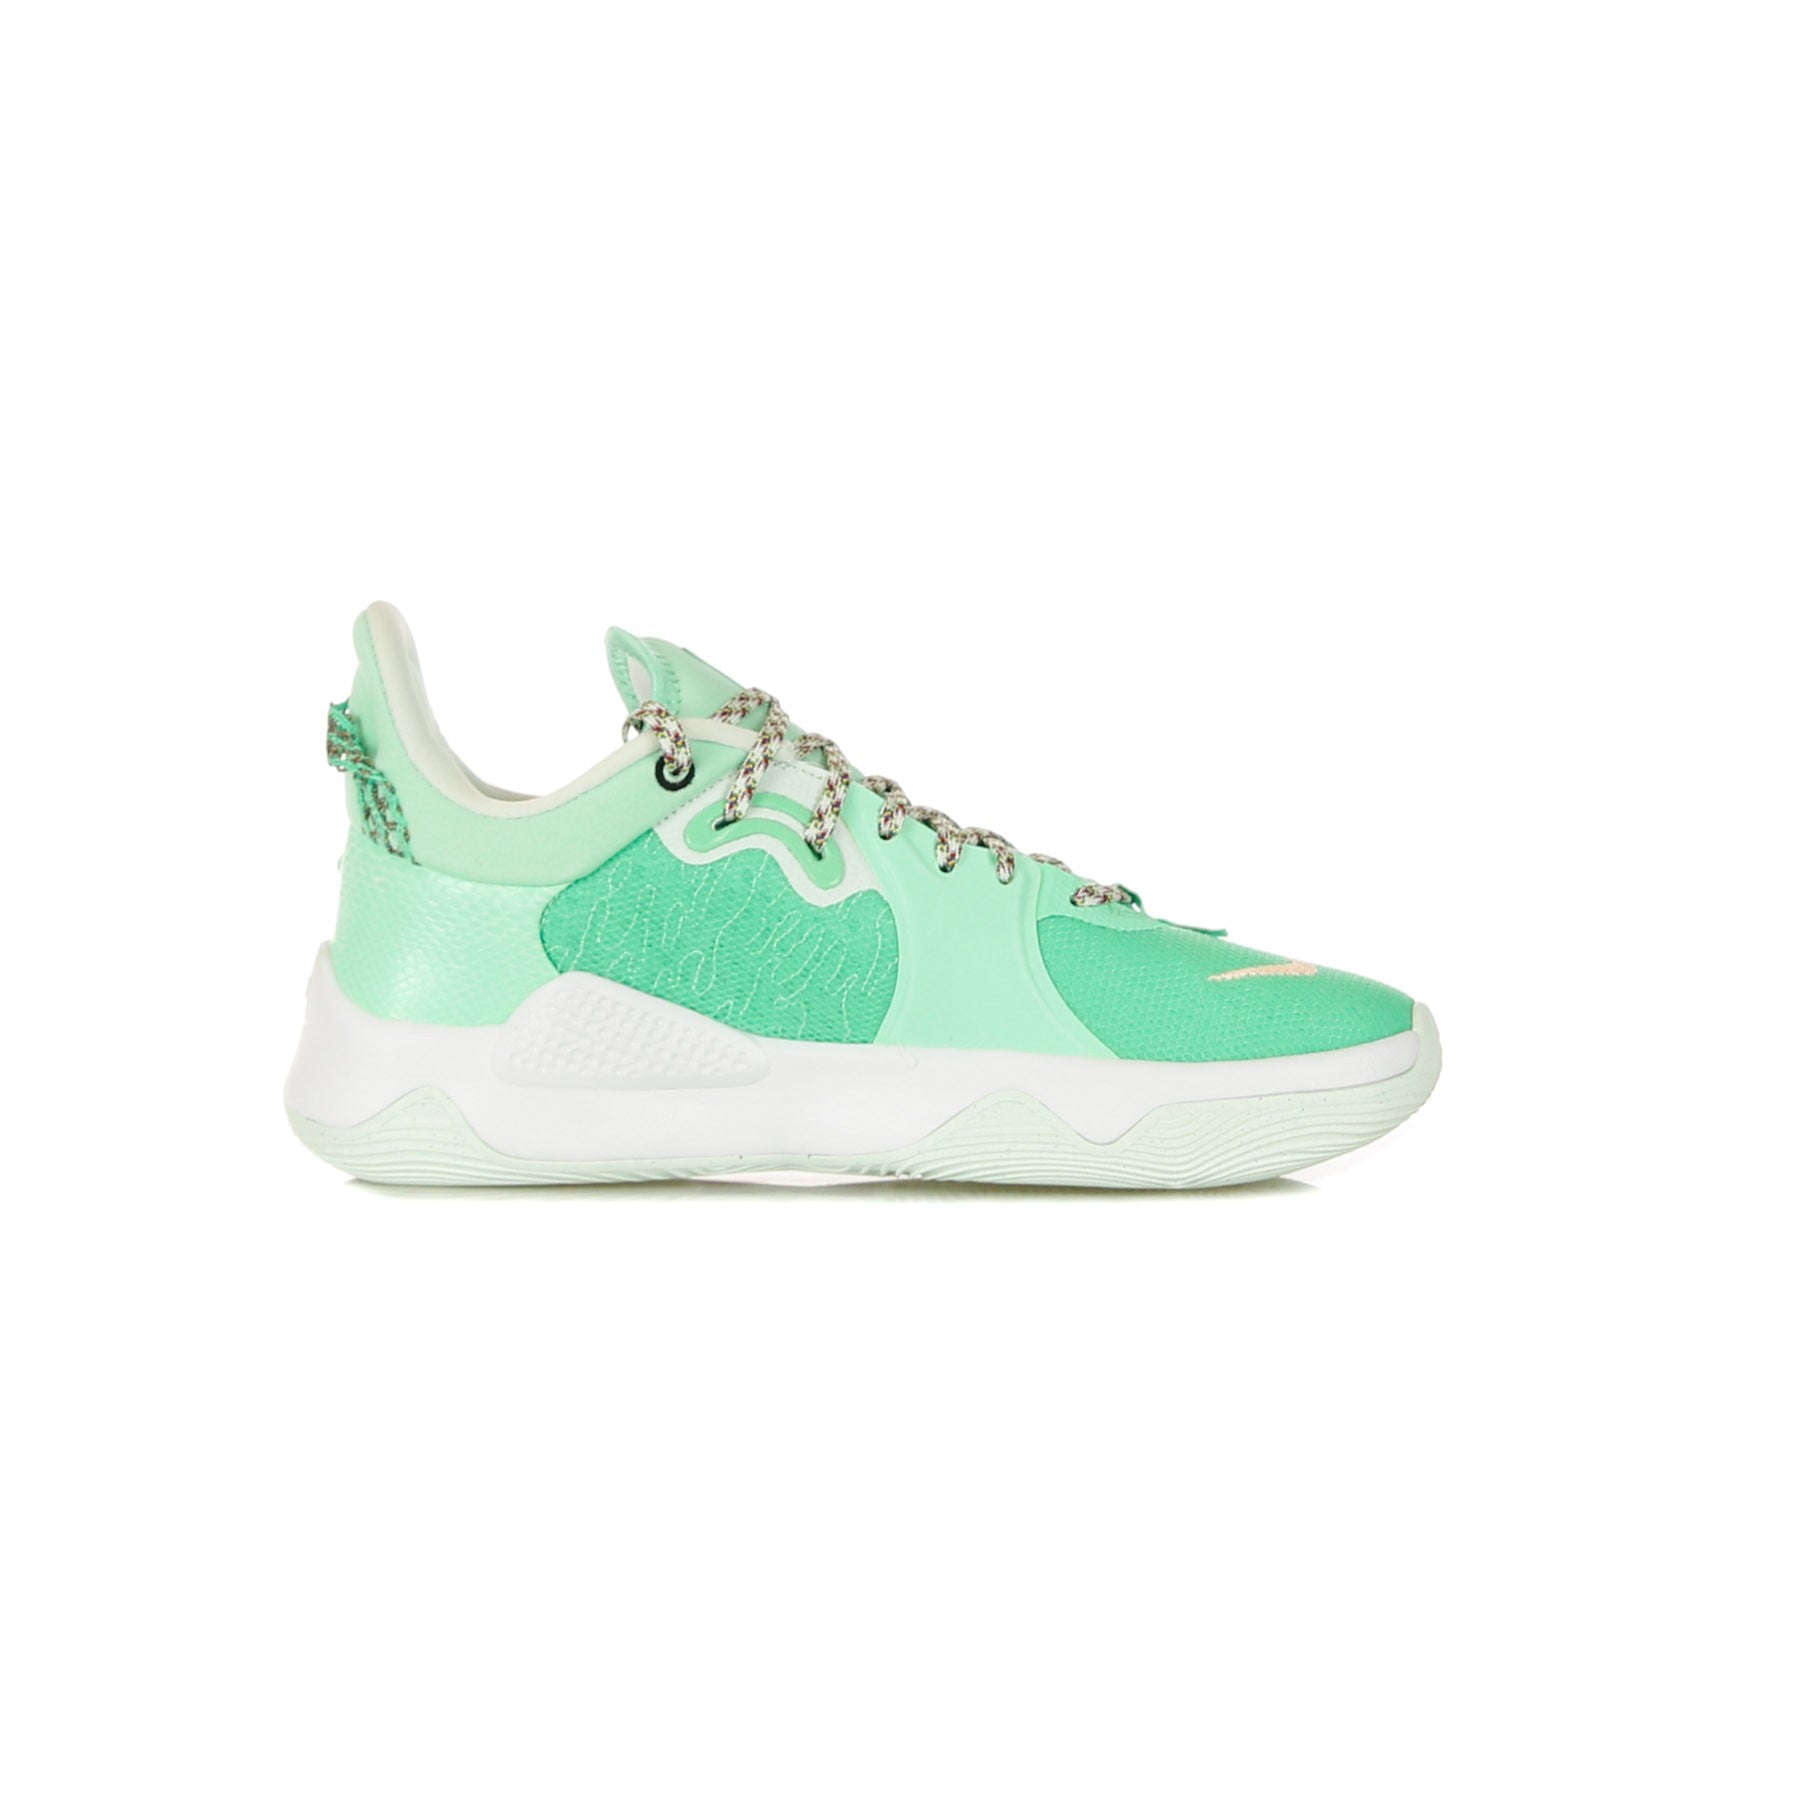 Low Men's Shoe Pg 5 "play For The Future" Green Glow/barely Green/glacier Blue